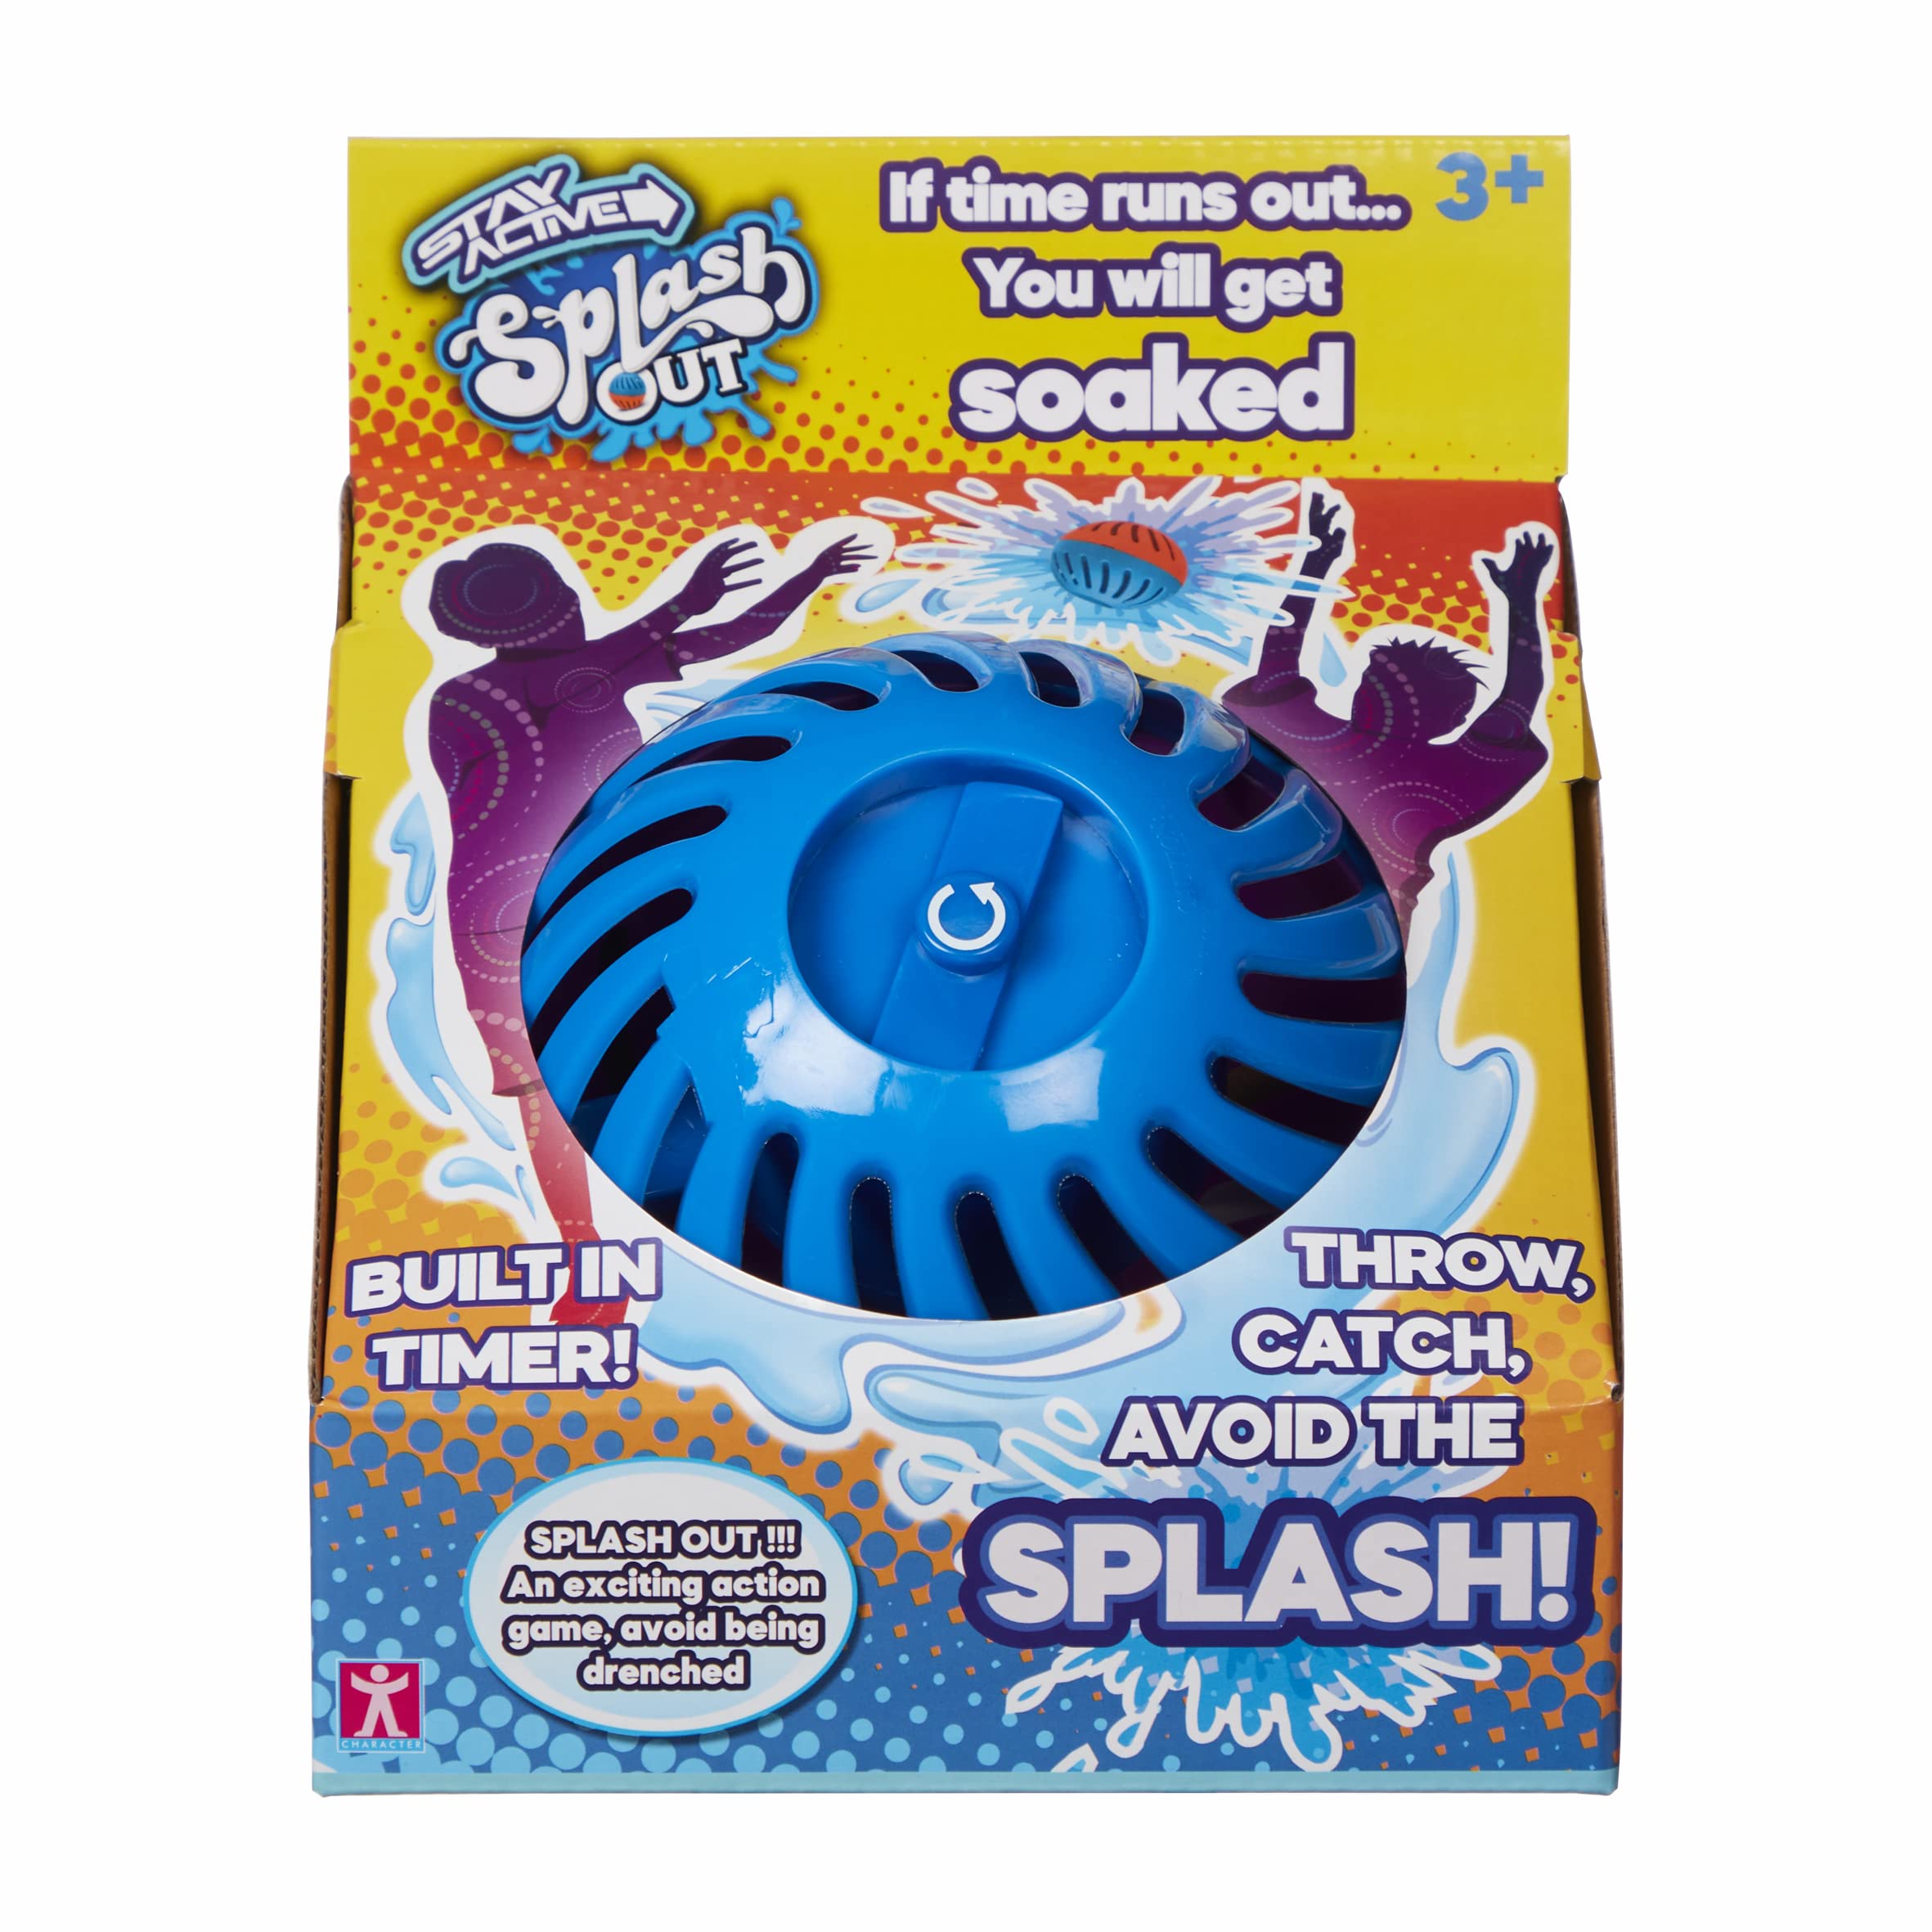 STAY ACTIVE SPLASH OUT throwing & catching water bust with timer balloon indoor outdoor activity fun family toy game boys girls game